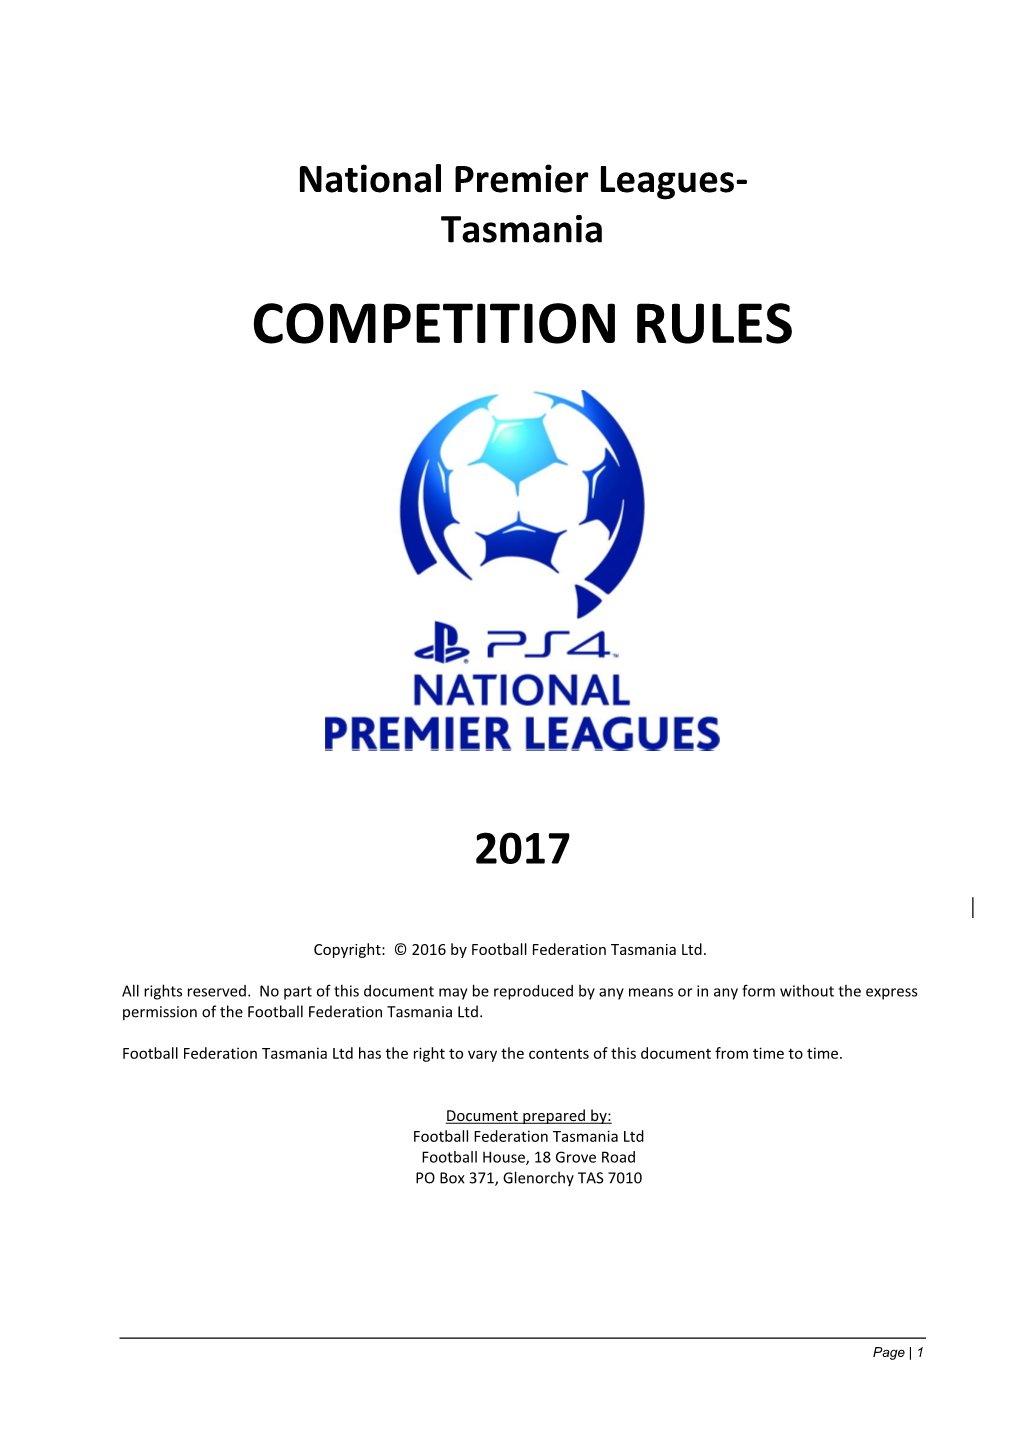 FFT Competition Rules